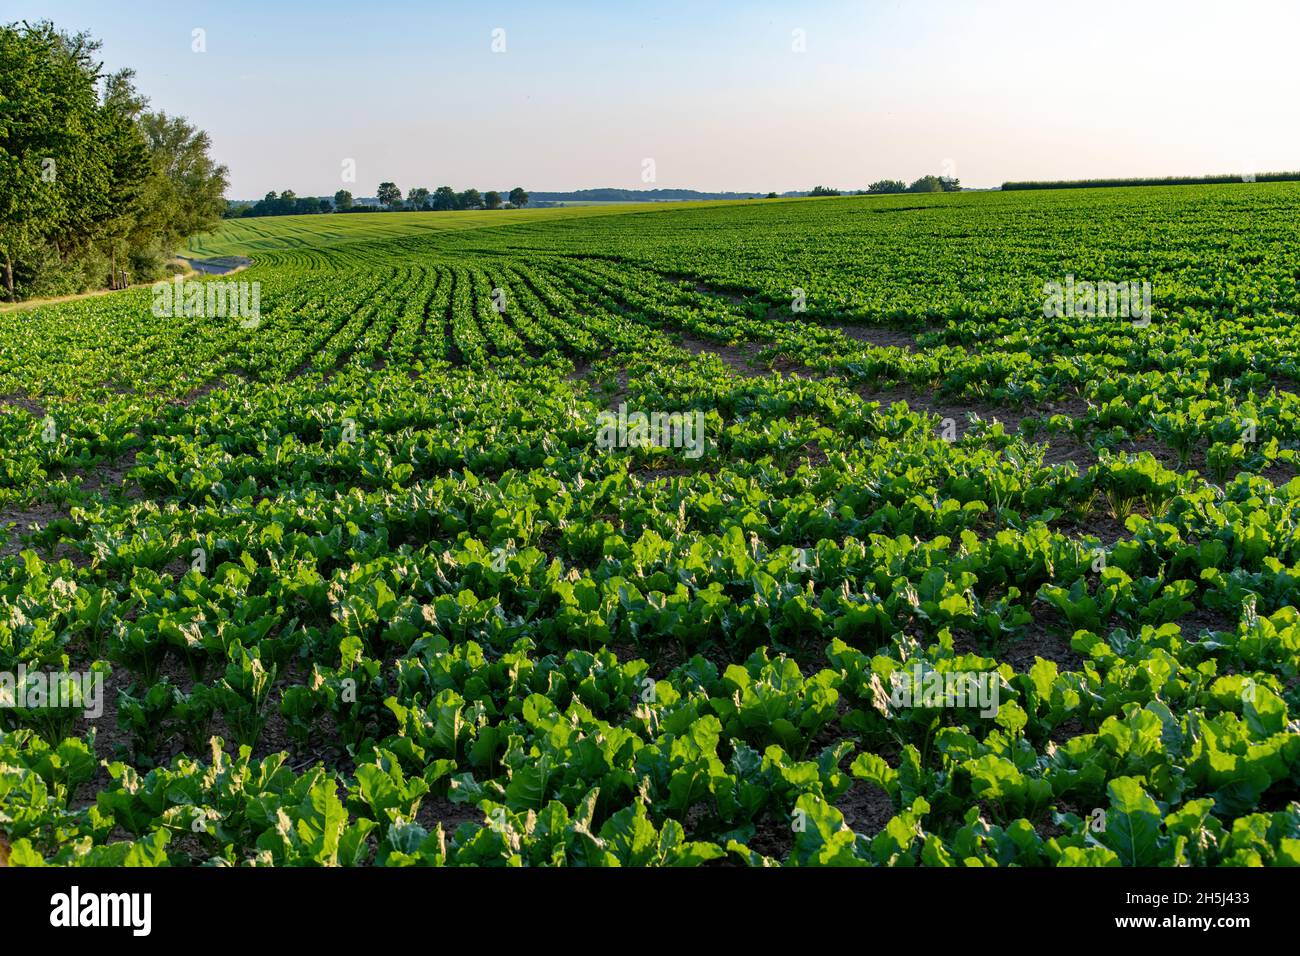 Panoramic view of hilly Limburg agricultural landscape with newly planted beetroot crop in curved lines close to Valkenburg, the Netherlands Stock Photo